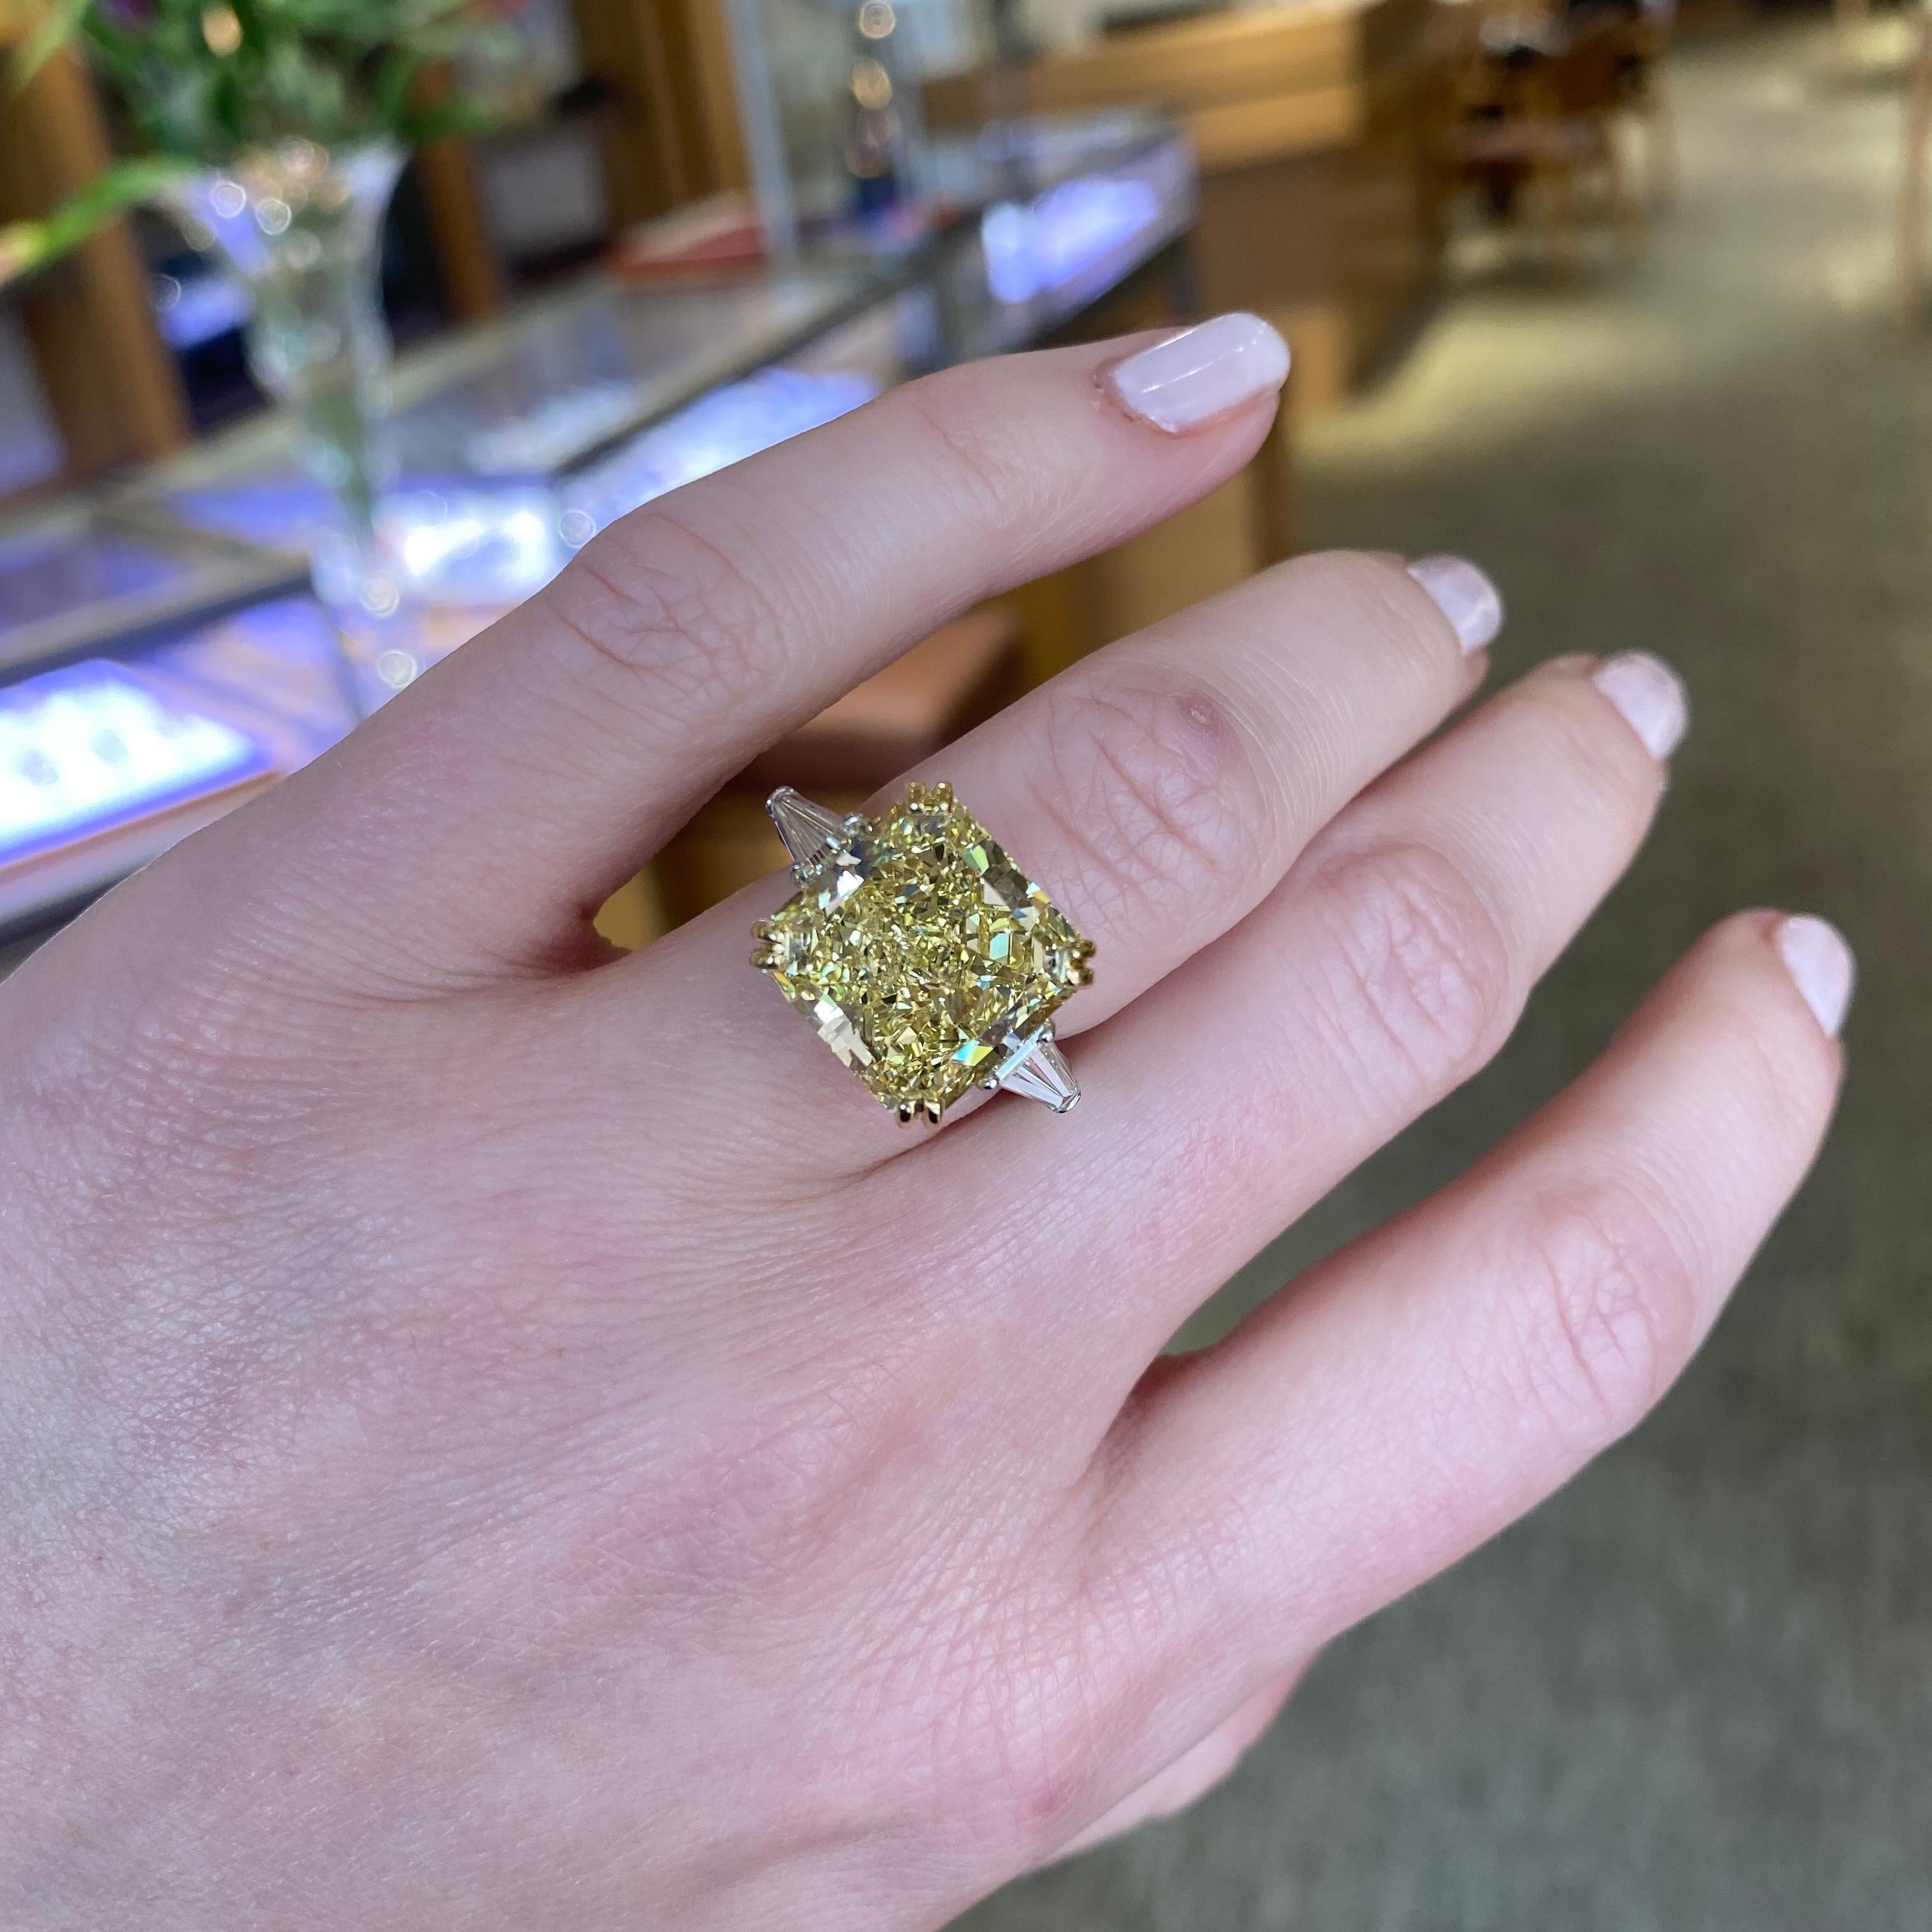 Designed and handmade by Mark Areias Jewelers in Platinum and 18 karat yellow gold. Set with one important vibrant fancy yellow cushion cut diamond and two (2) tapered baguette diamonds. The vibrant center diamond is set in 18 karat yellow gold with